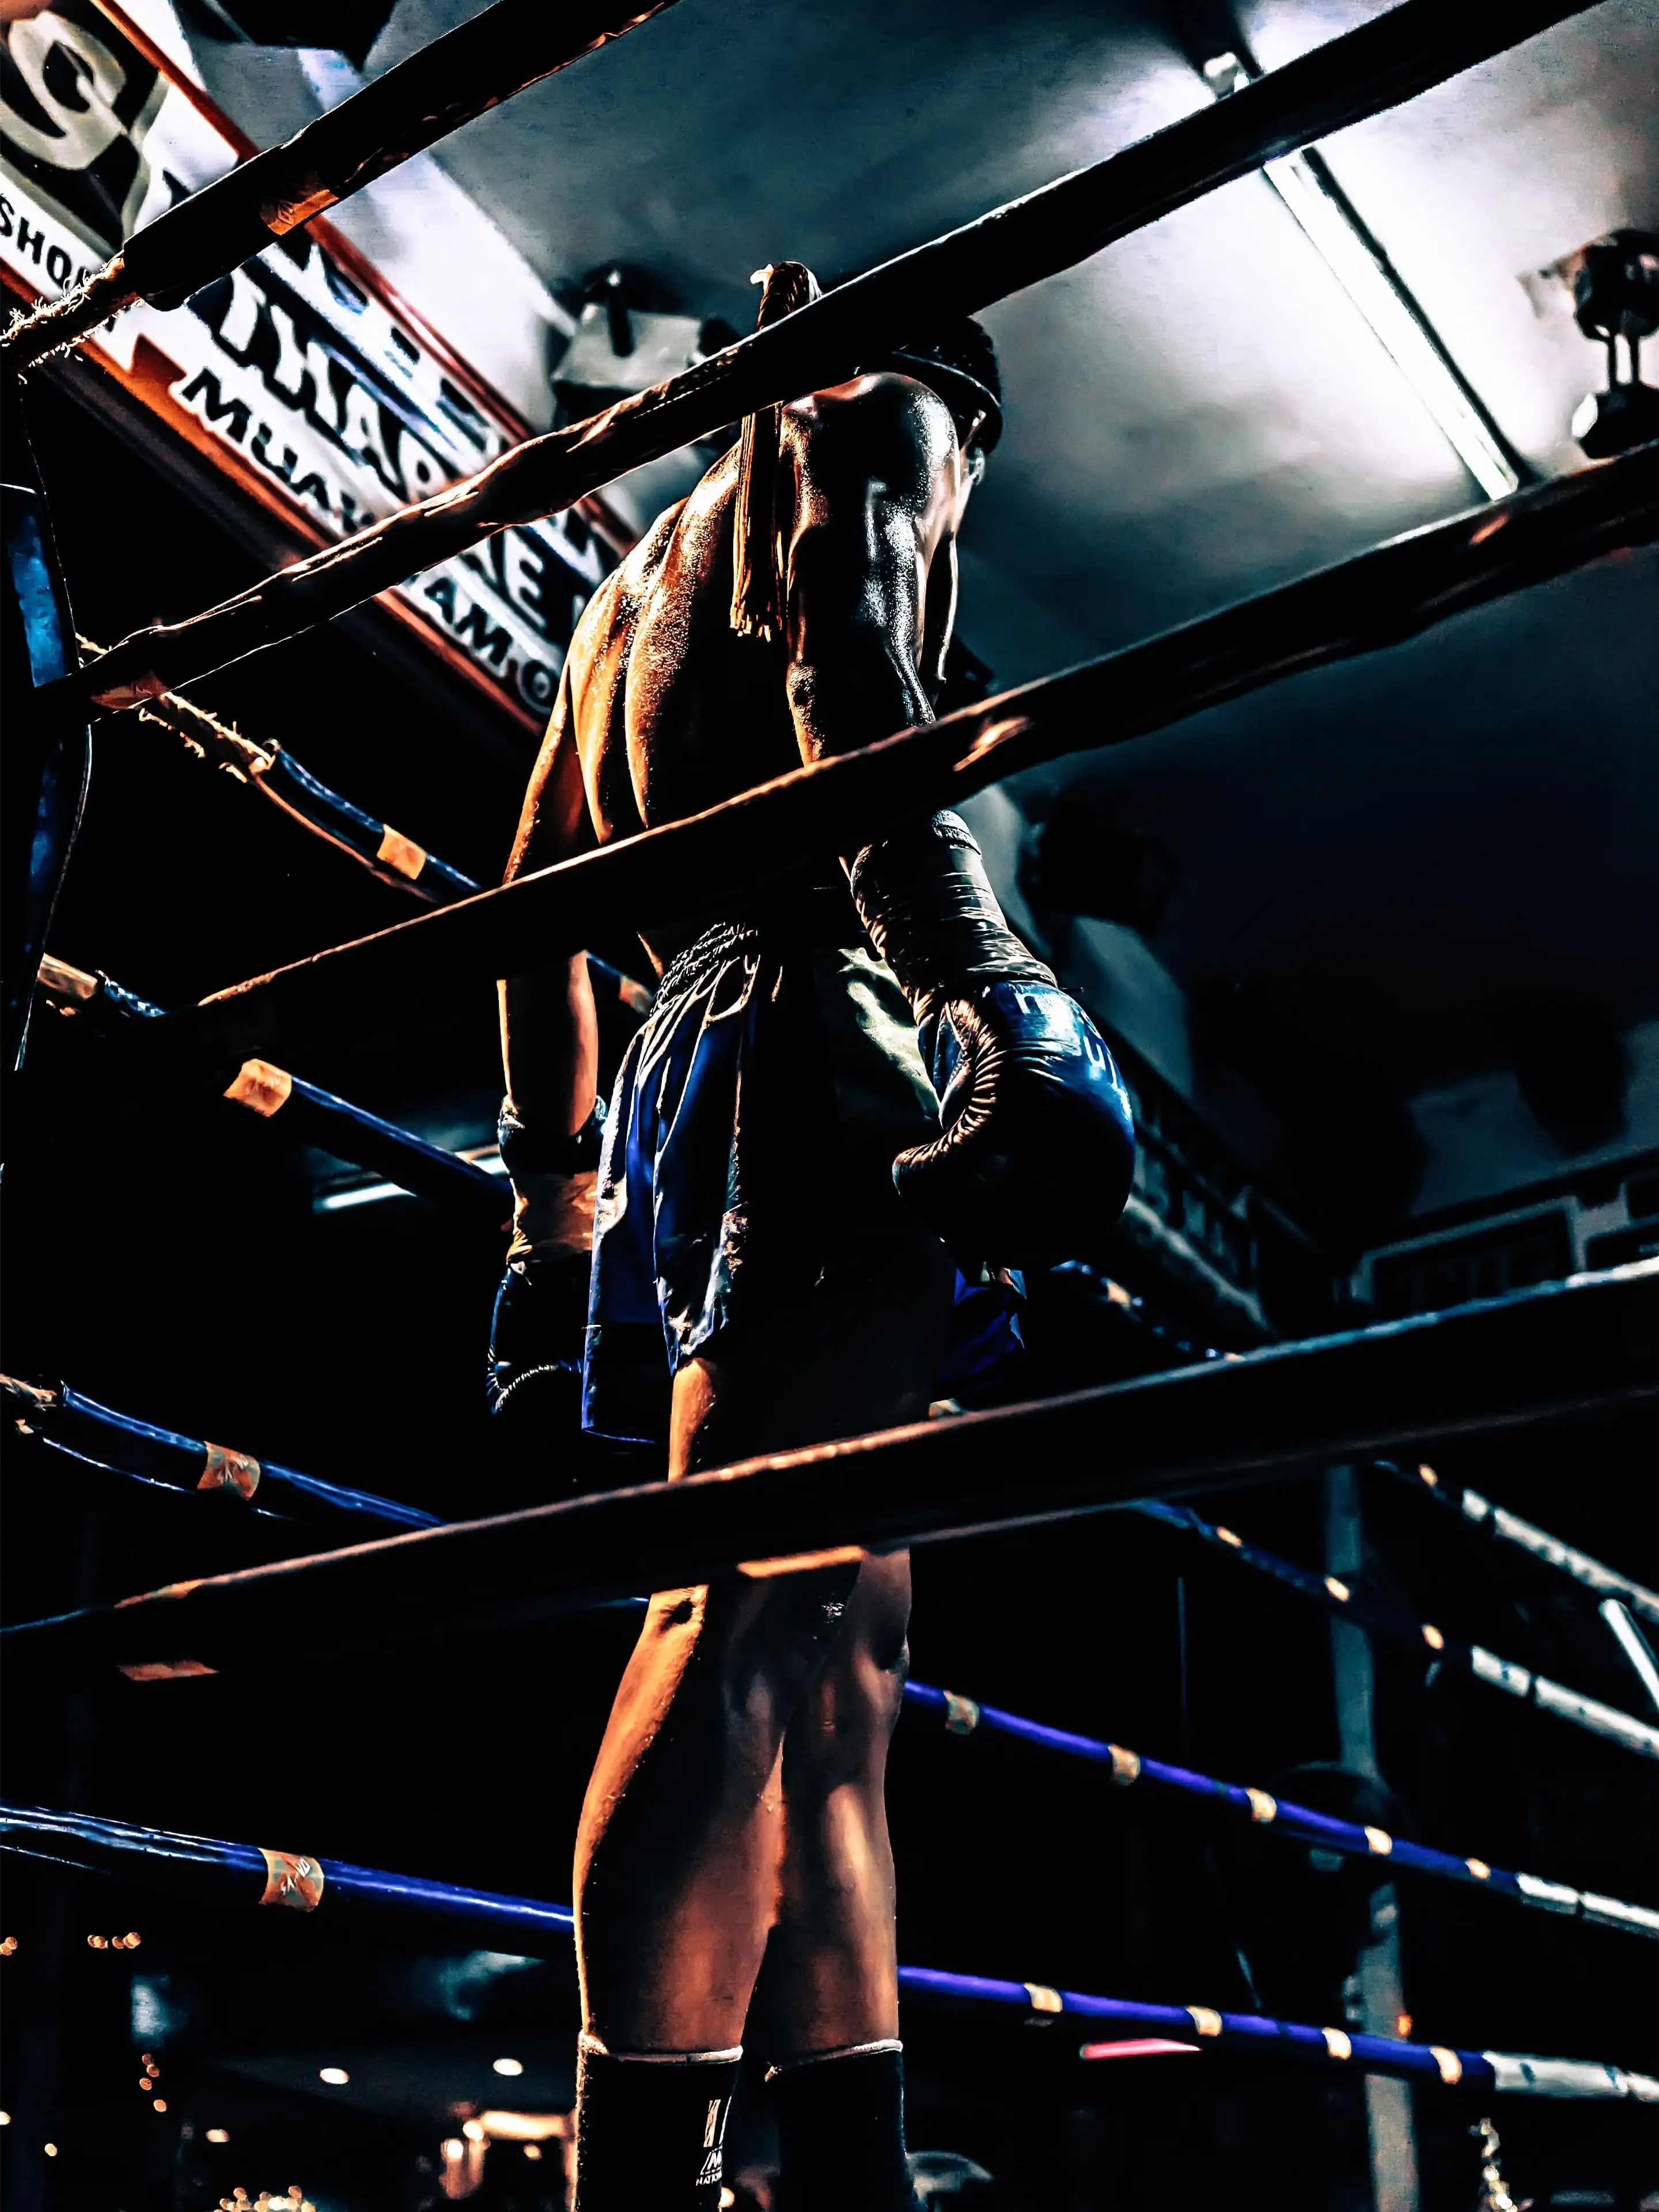 500 Muay Thai Pictures  Download Free Images on Unsplash